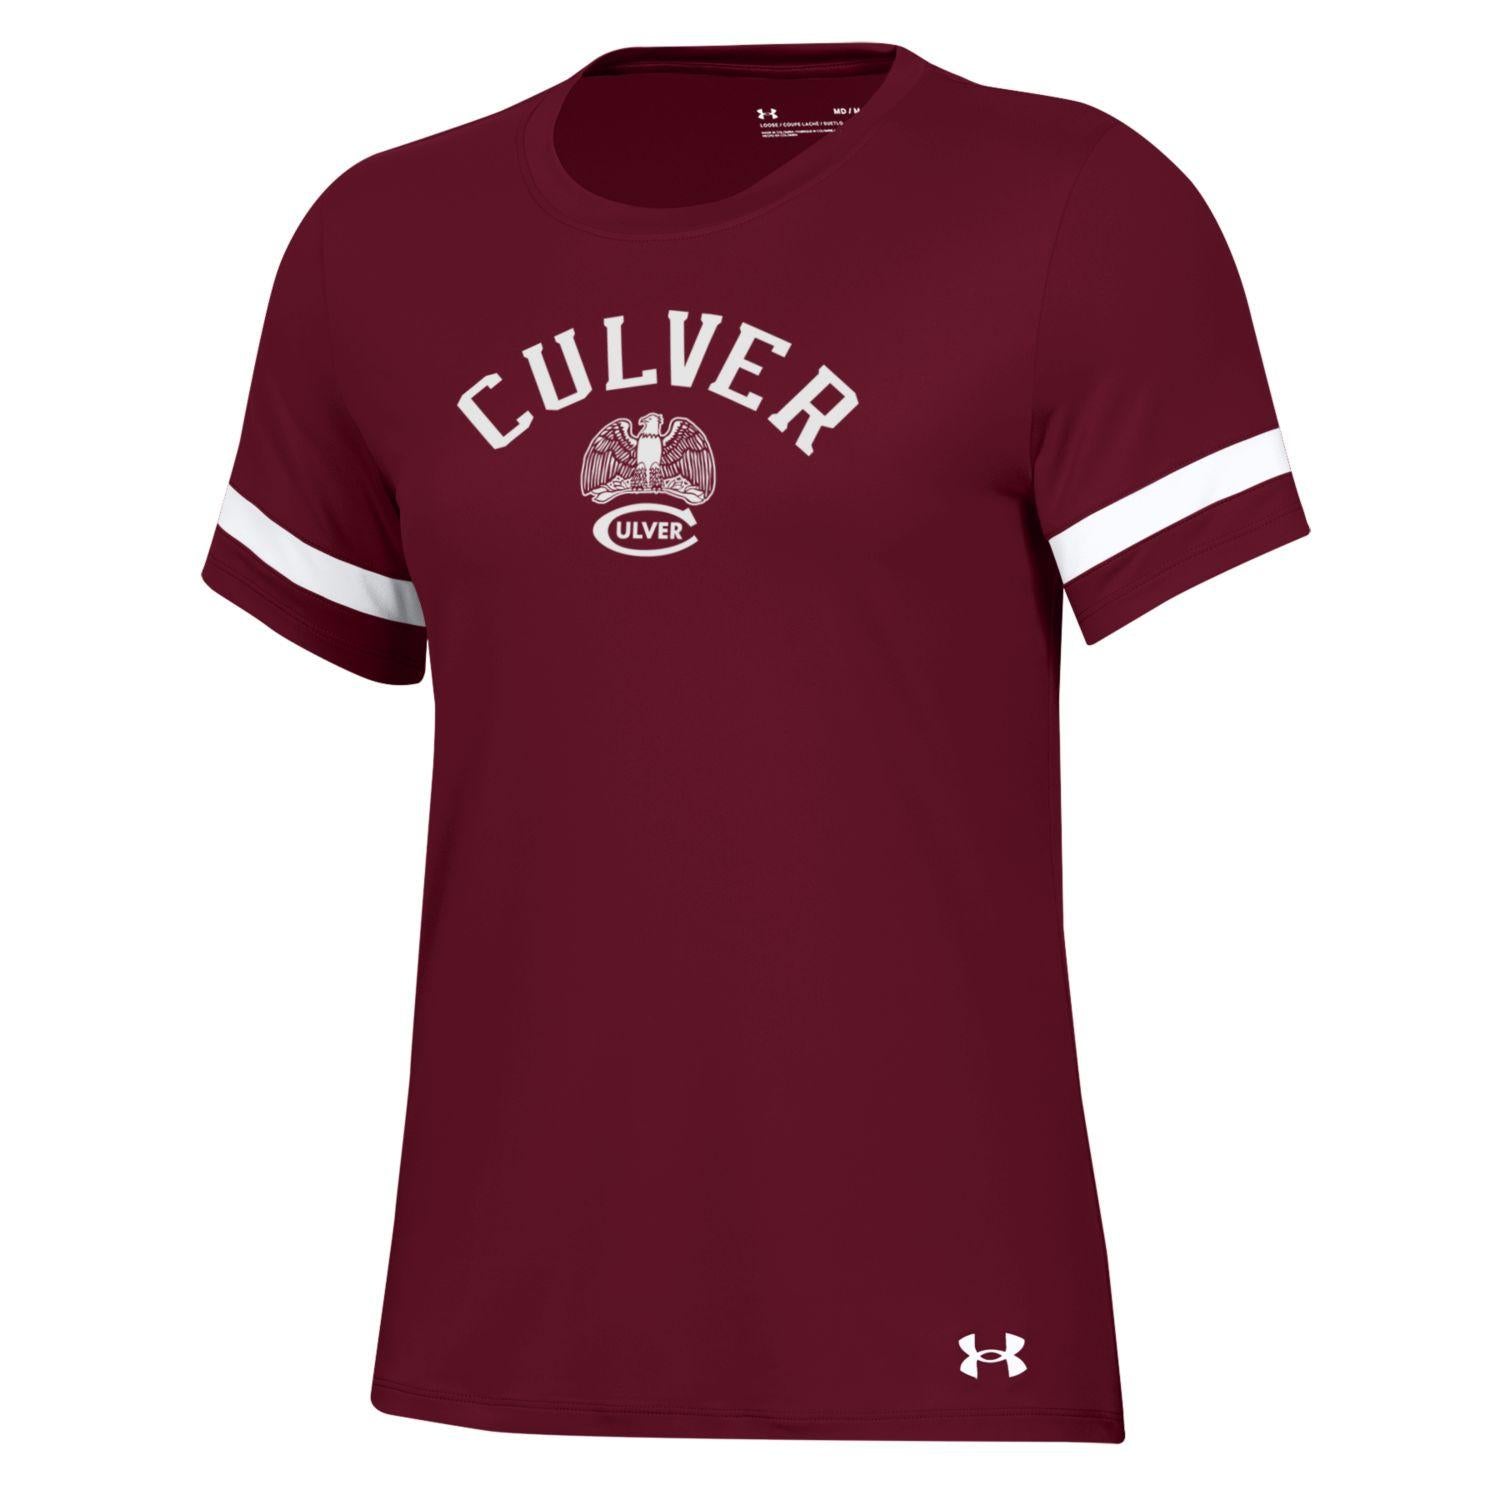 Under Armour Womens Knockout Short Sleeve Tee - Maroon